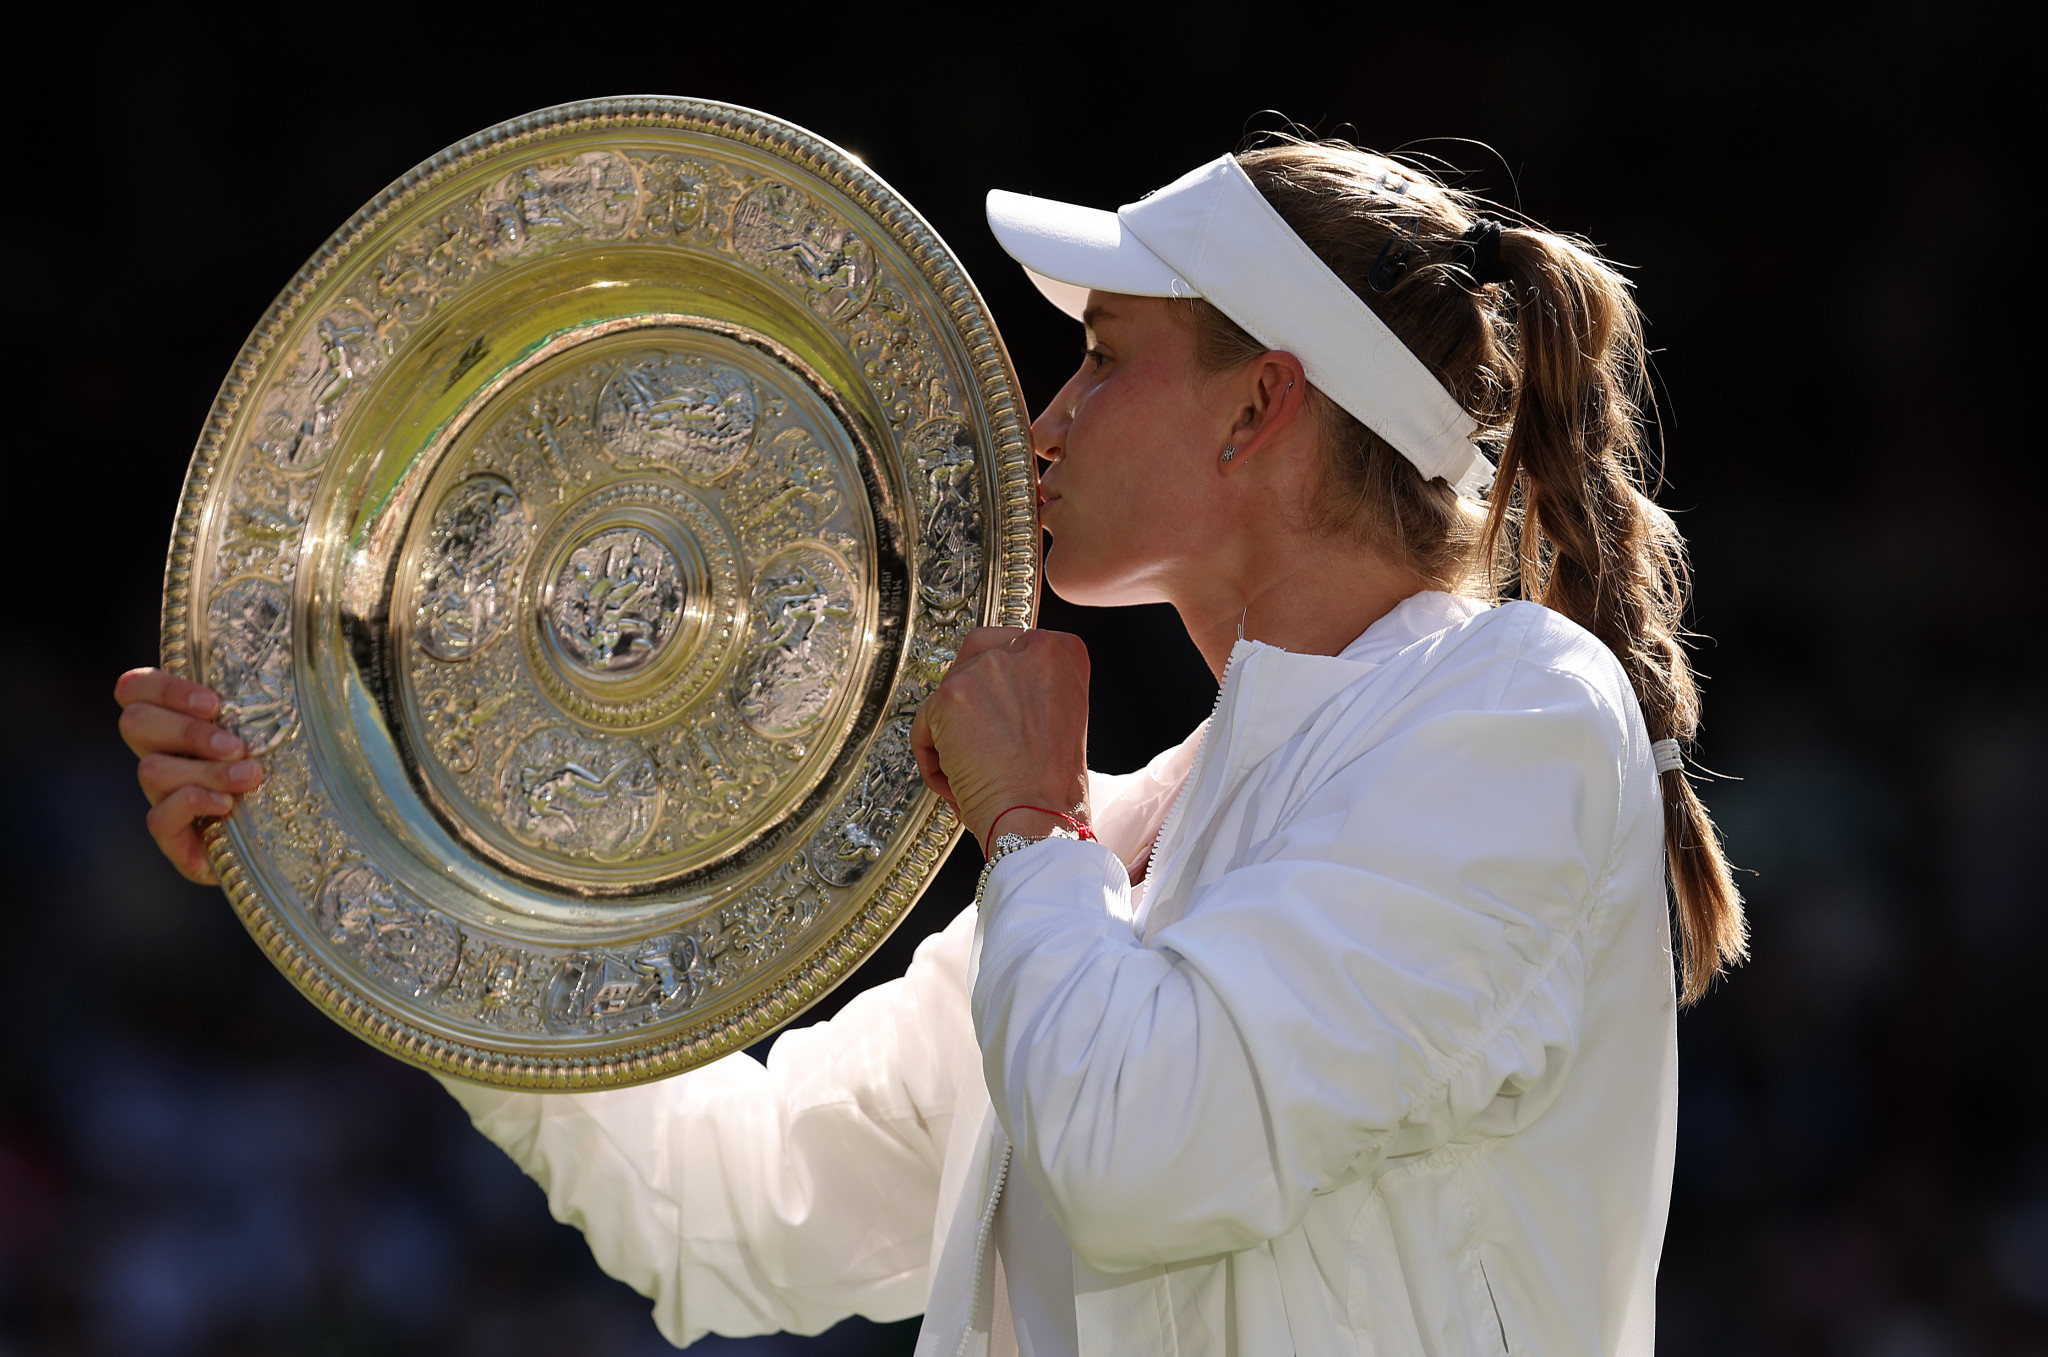 Kazakhstan's Elena Rybakina lifted the first Grand Slam of her career by winning this year's Wimbledon, an event stripped of rankings by the ATP and WTA after Russian and Belarusian players were banned ©Getty Images